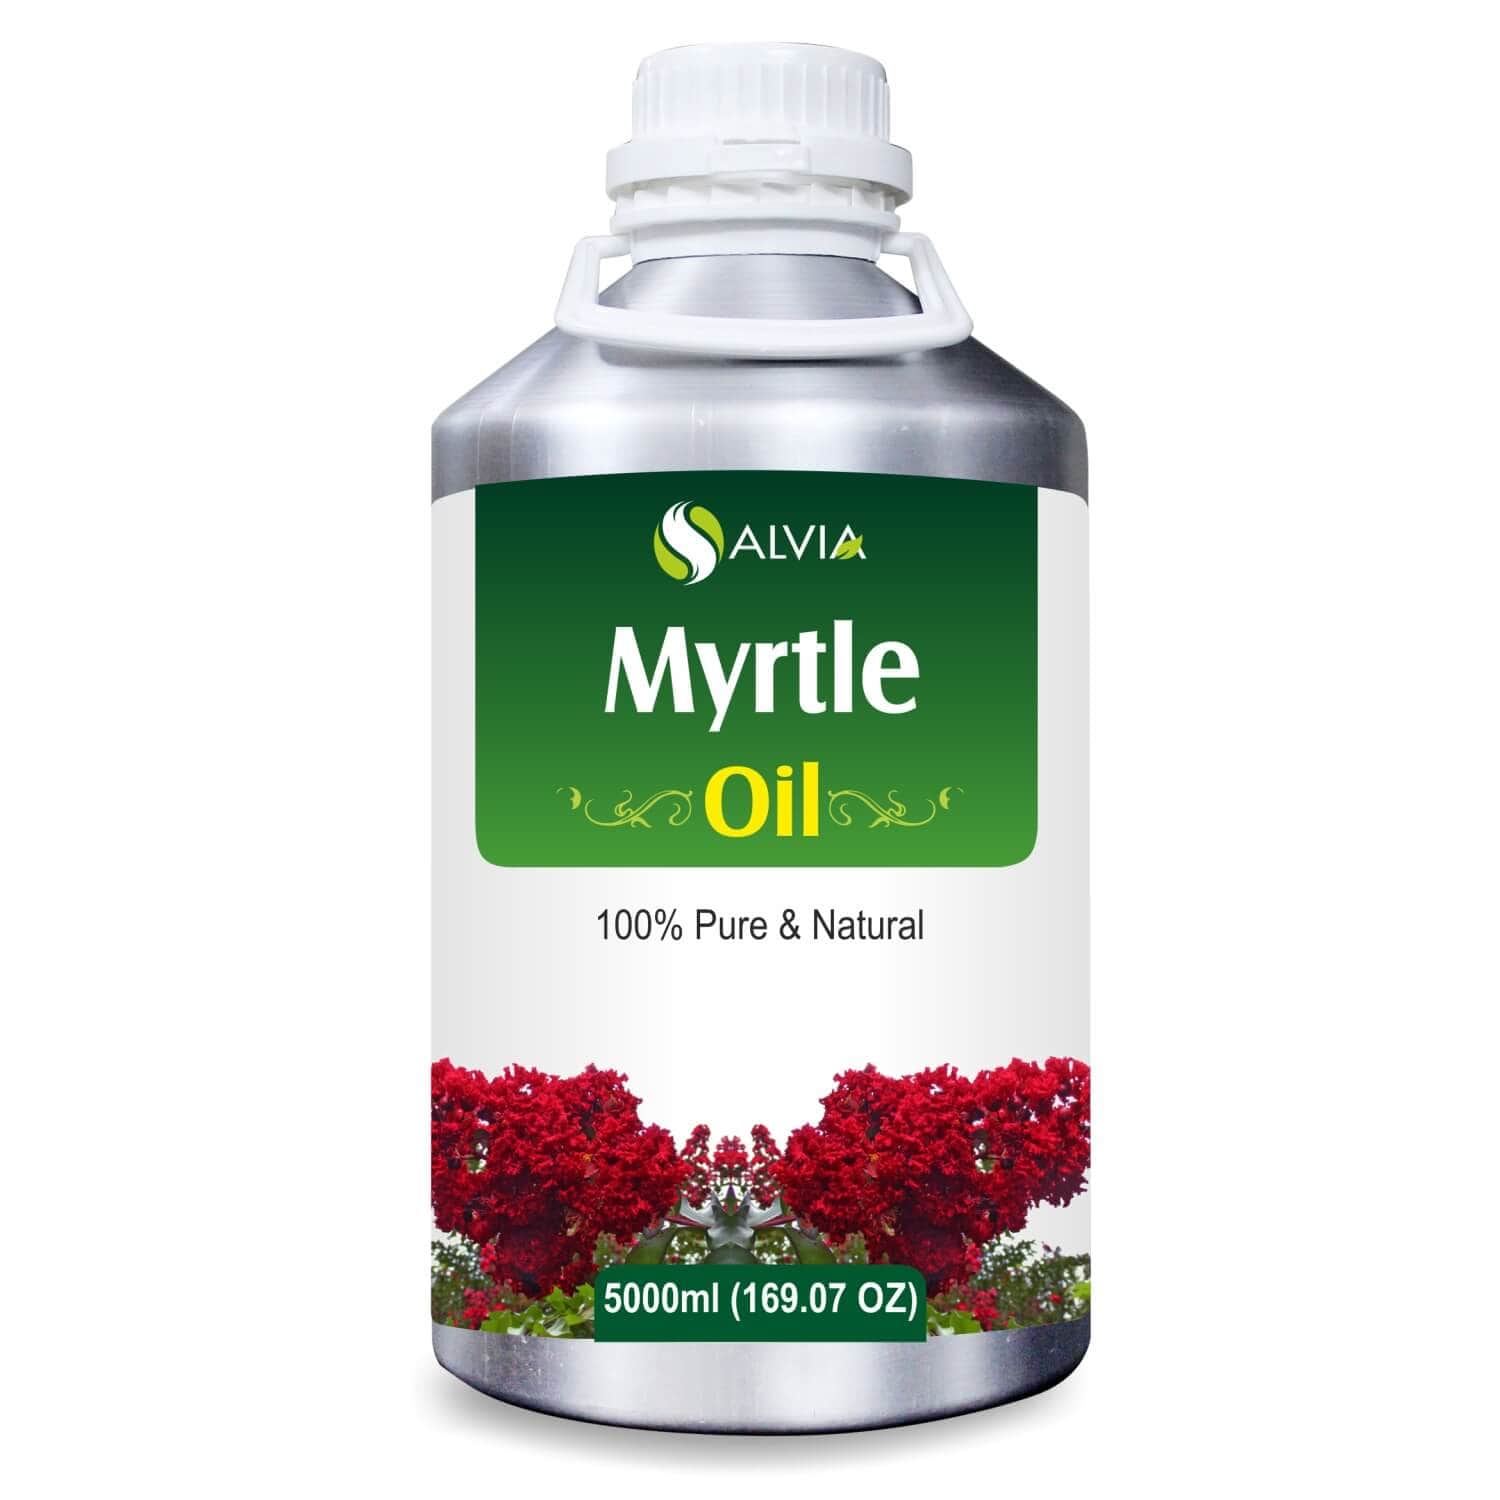 Salvia Natural Essential Oils 5000ml Myrtle Oil (Myrtus) Natural Essential Oil Undiluted And Uncut Therapeutic Grade Quality Reduce Tension, Pain & Used For Skin Care